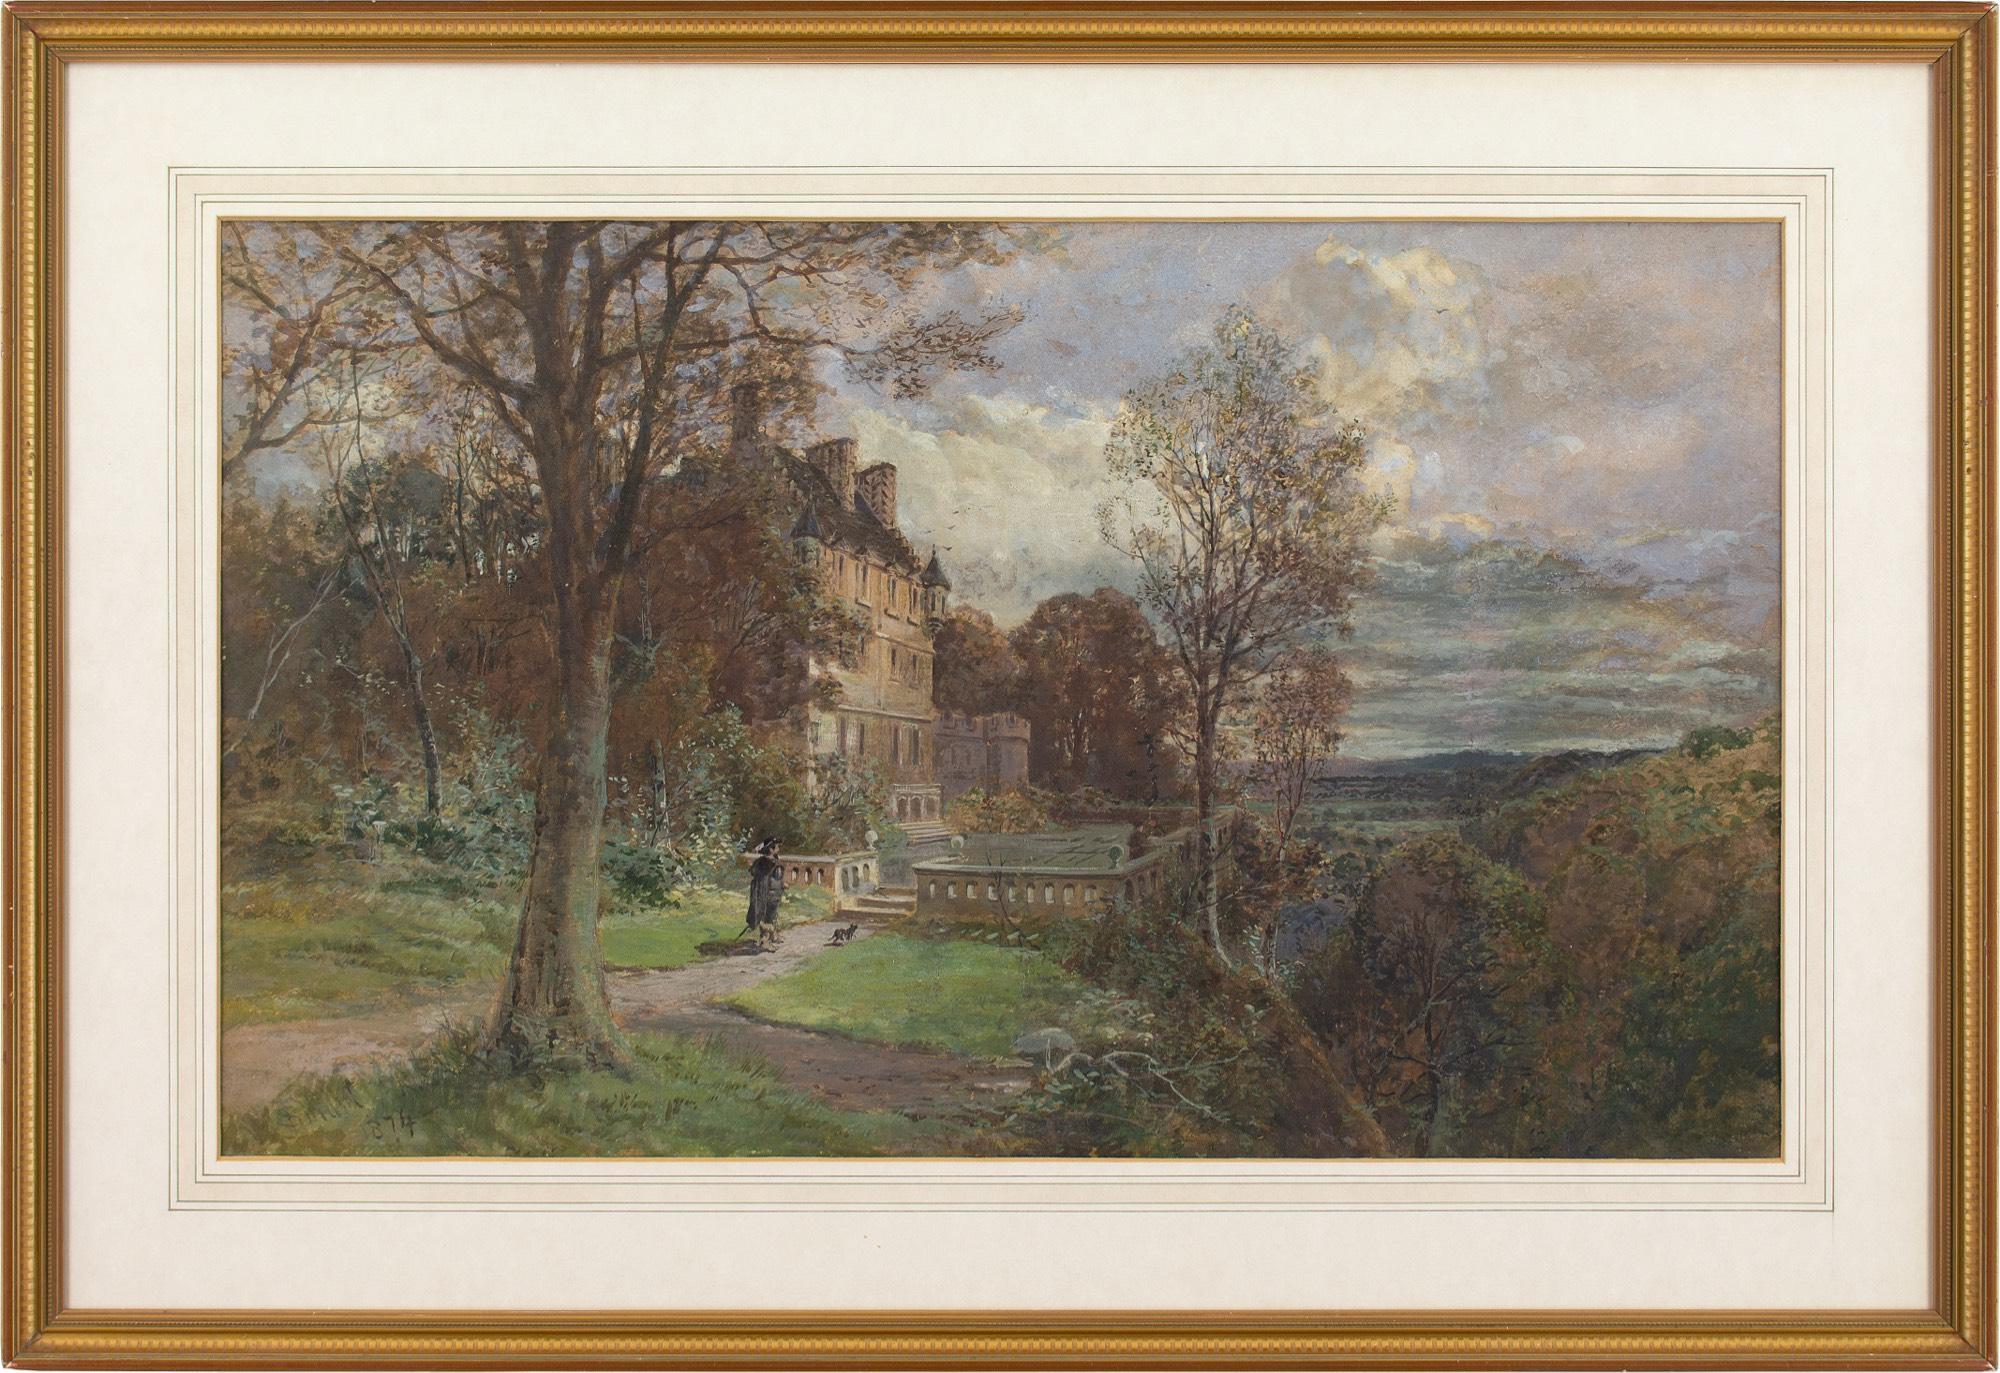 This late 19th-century watercolour by Scottish artist John Smart RSA RSW (1838-1899) depicts the grounds of a Scottish mansion in the baronial style.

Rooted atop a lofty peak, a grand old building beams with neo-gothic splendour. Its symmetrical